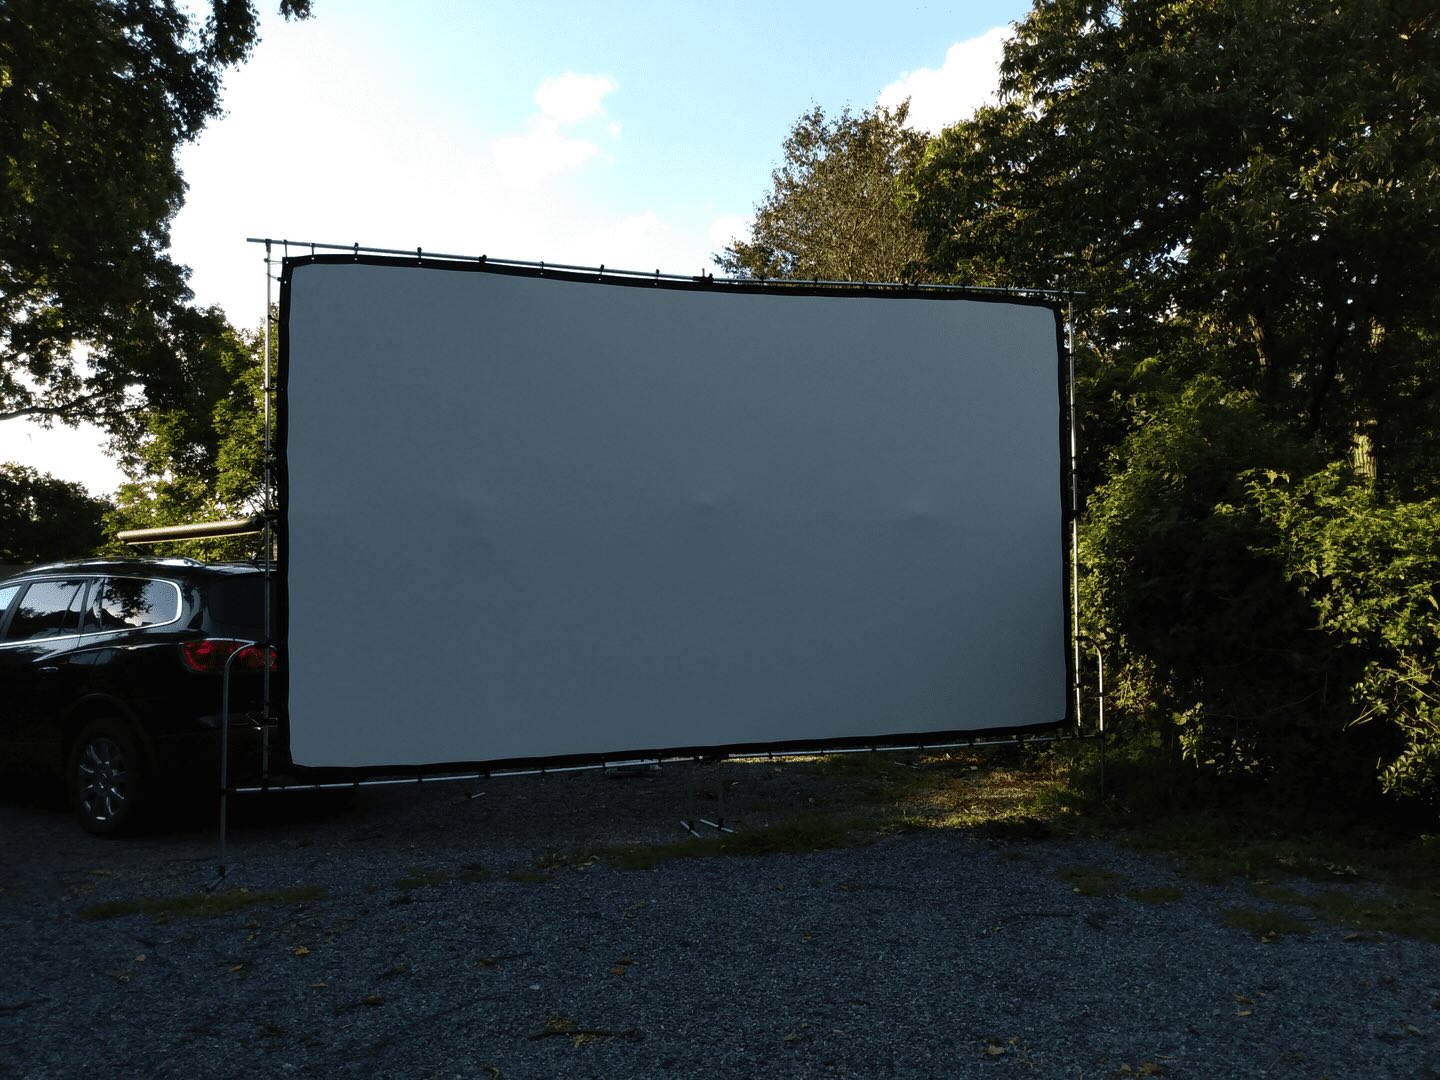 How To Build A Projector Screen Frame